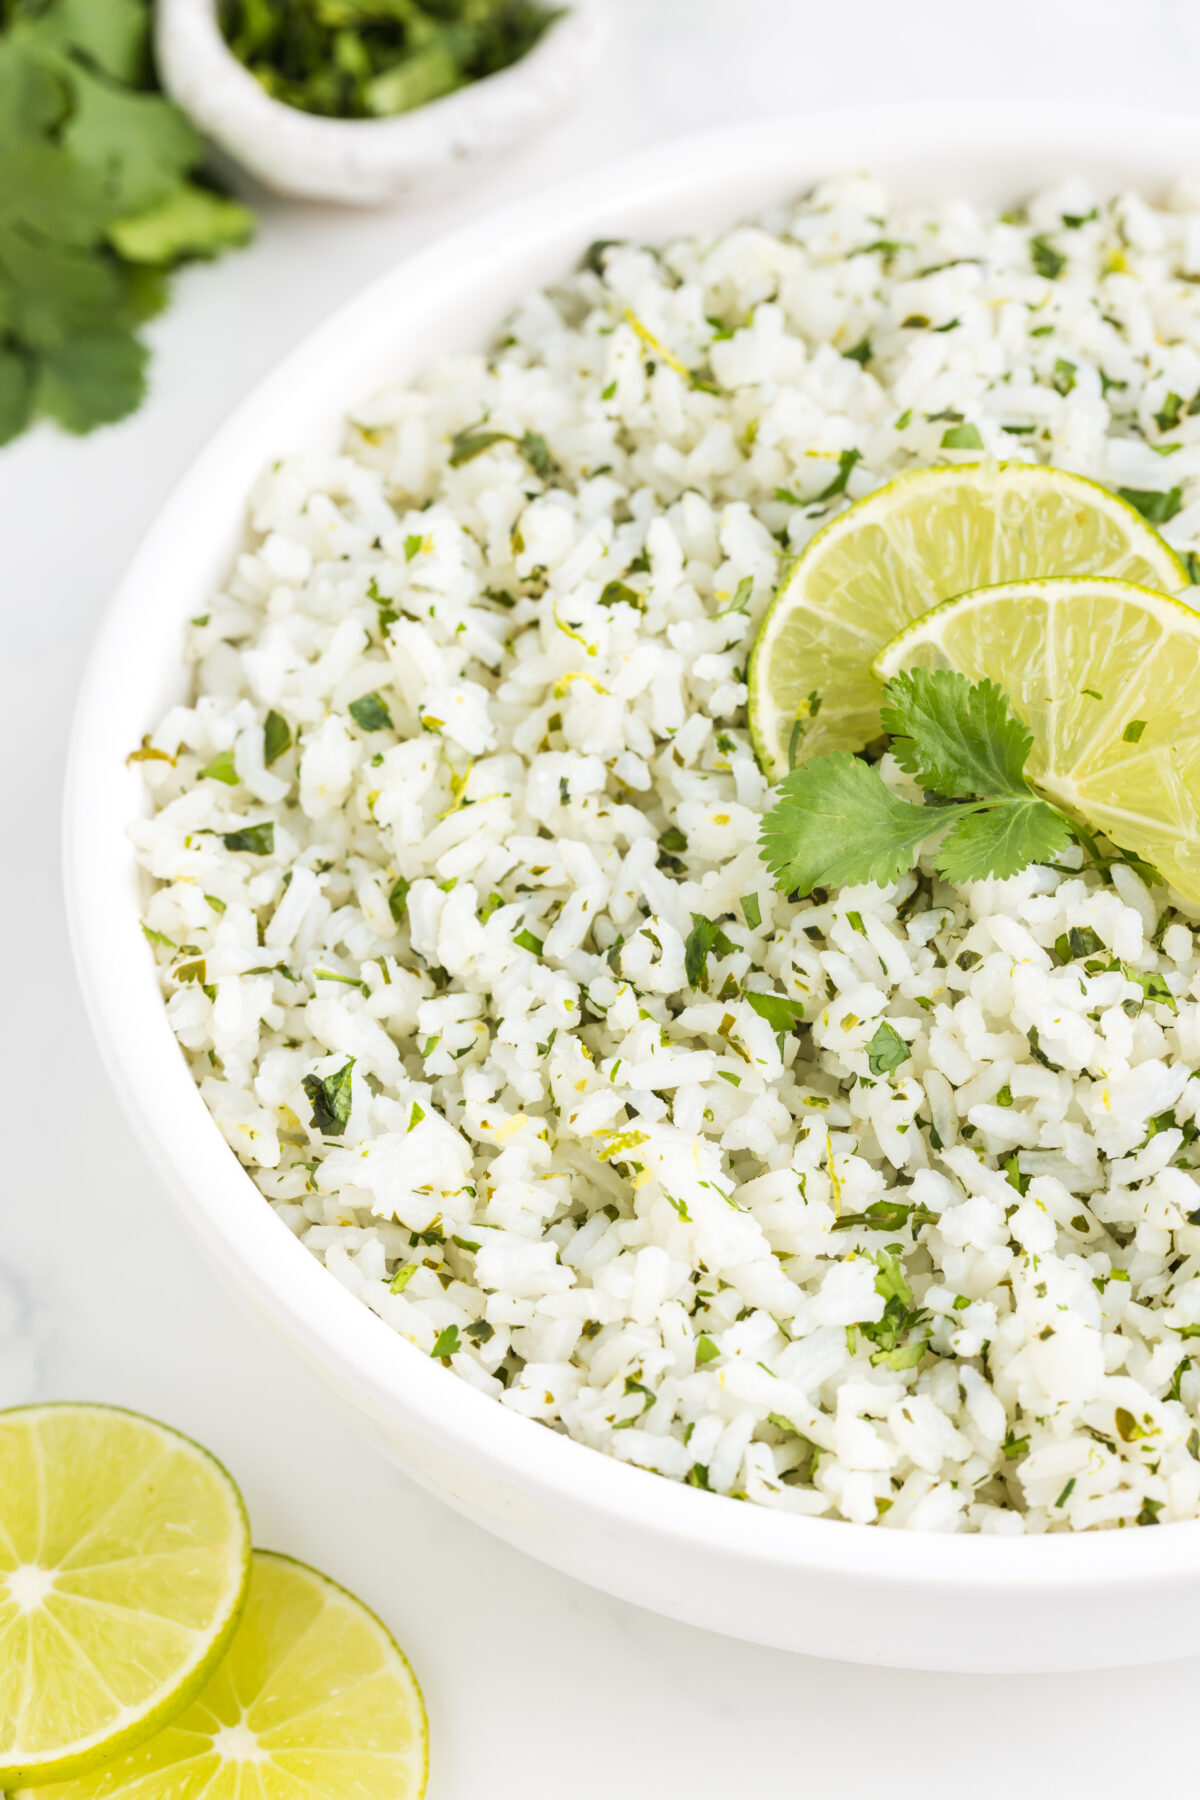 Whip up the perfect side dish with our Cilantro Lime Rice recipe. Packed with fresh herbs and zesty lime, this easy rice dish is irresistible.